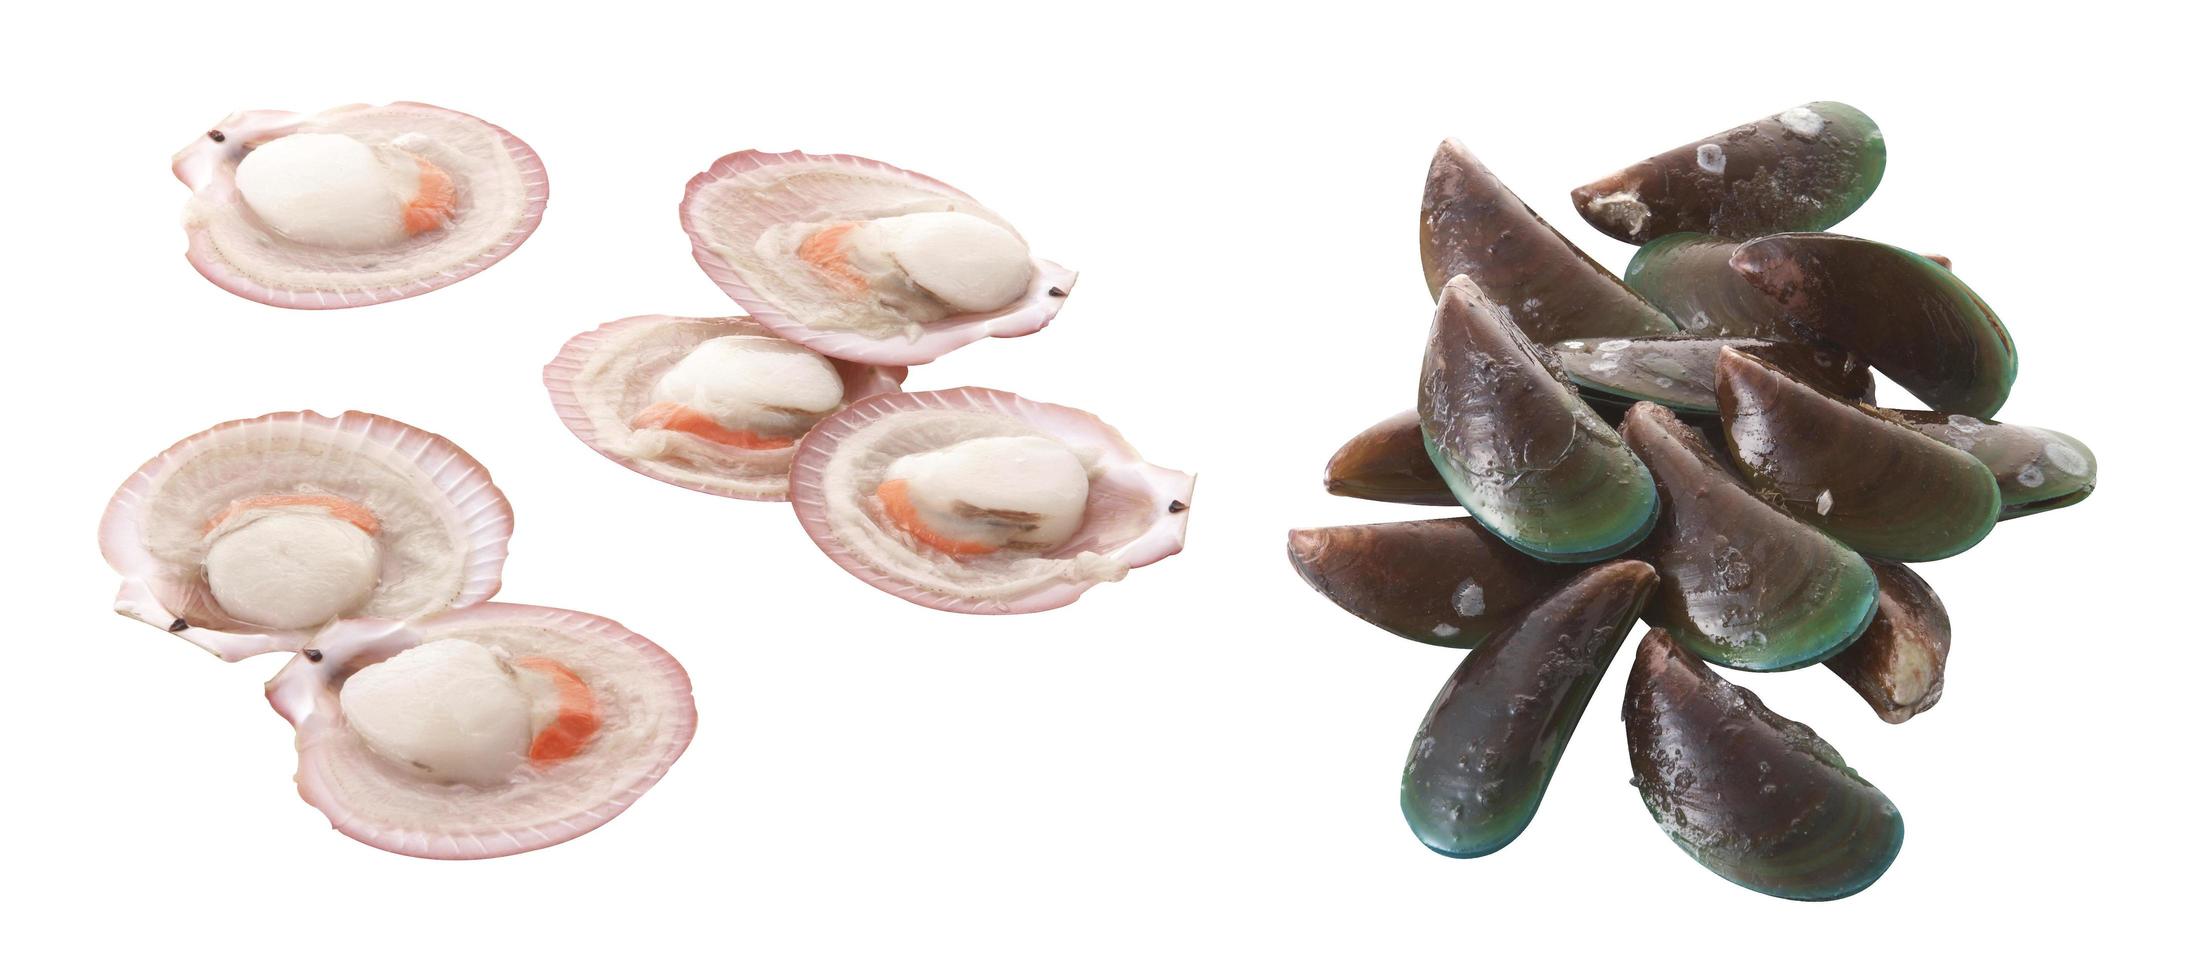 Group of raw scallop and mussel on white background photo